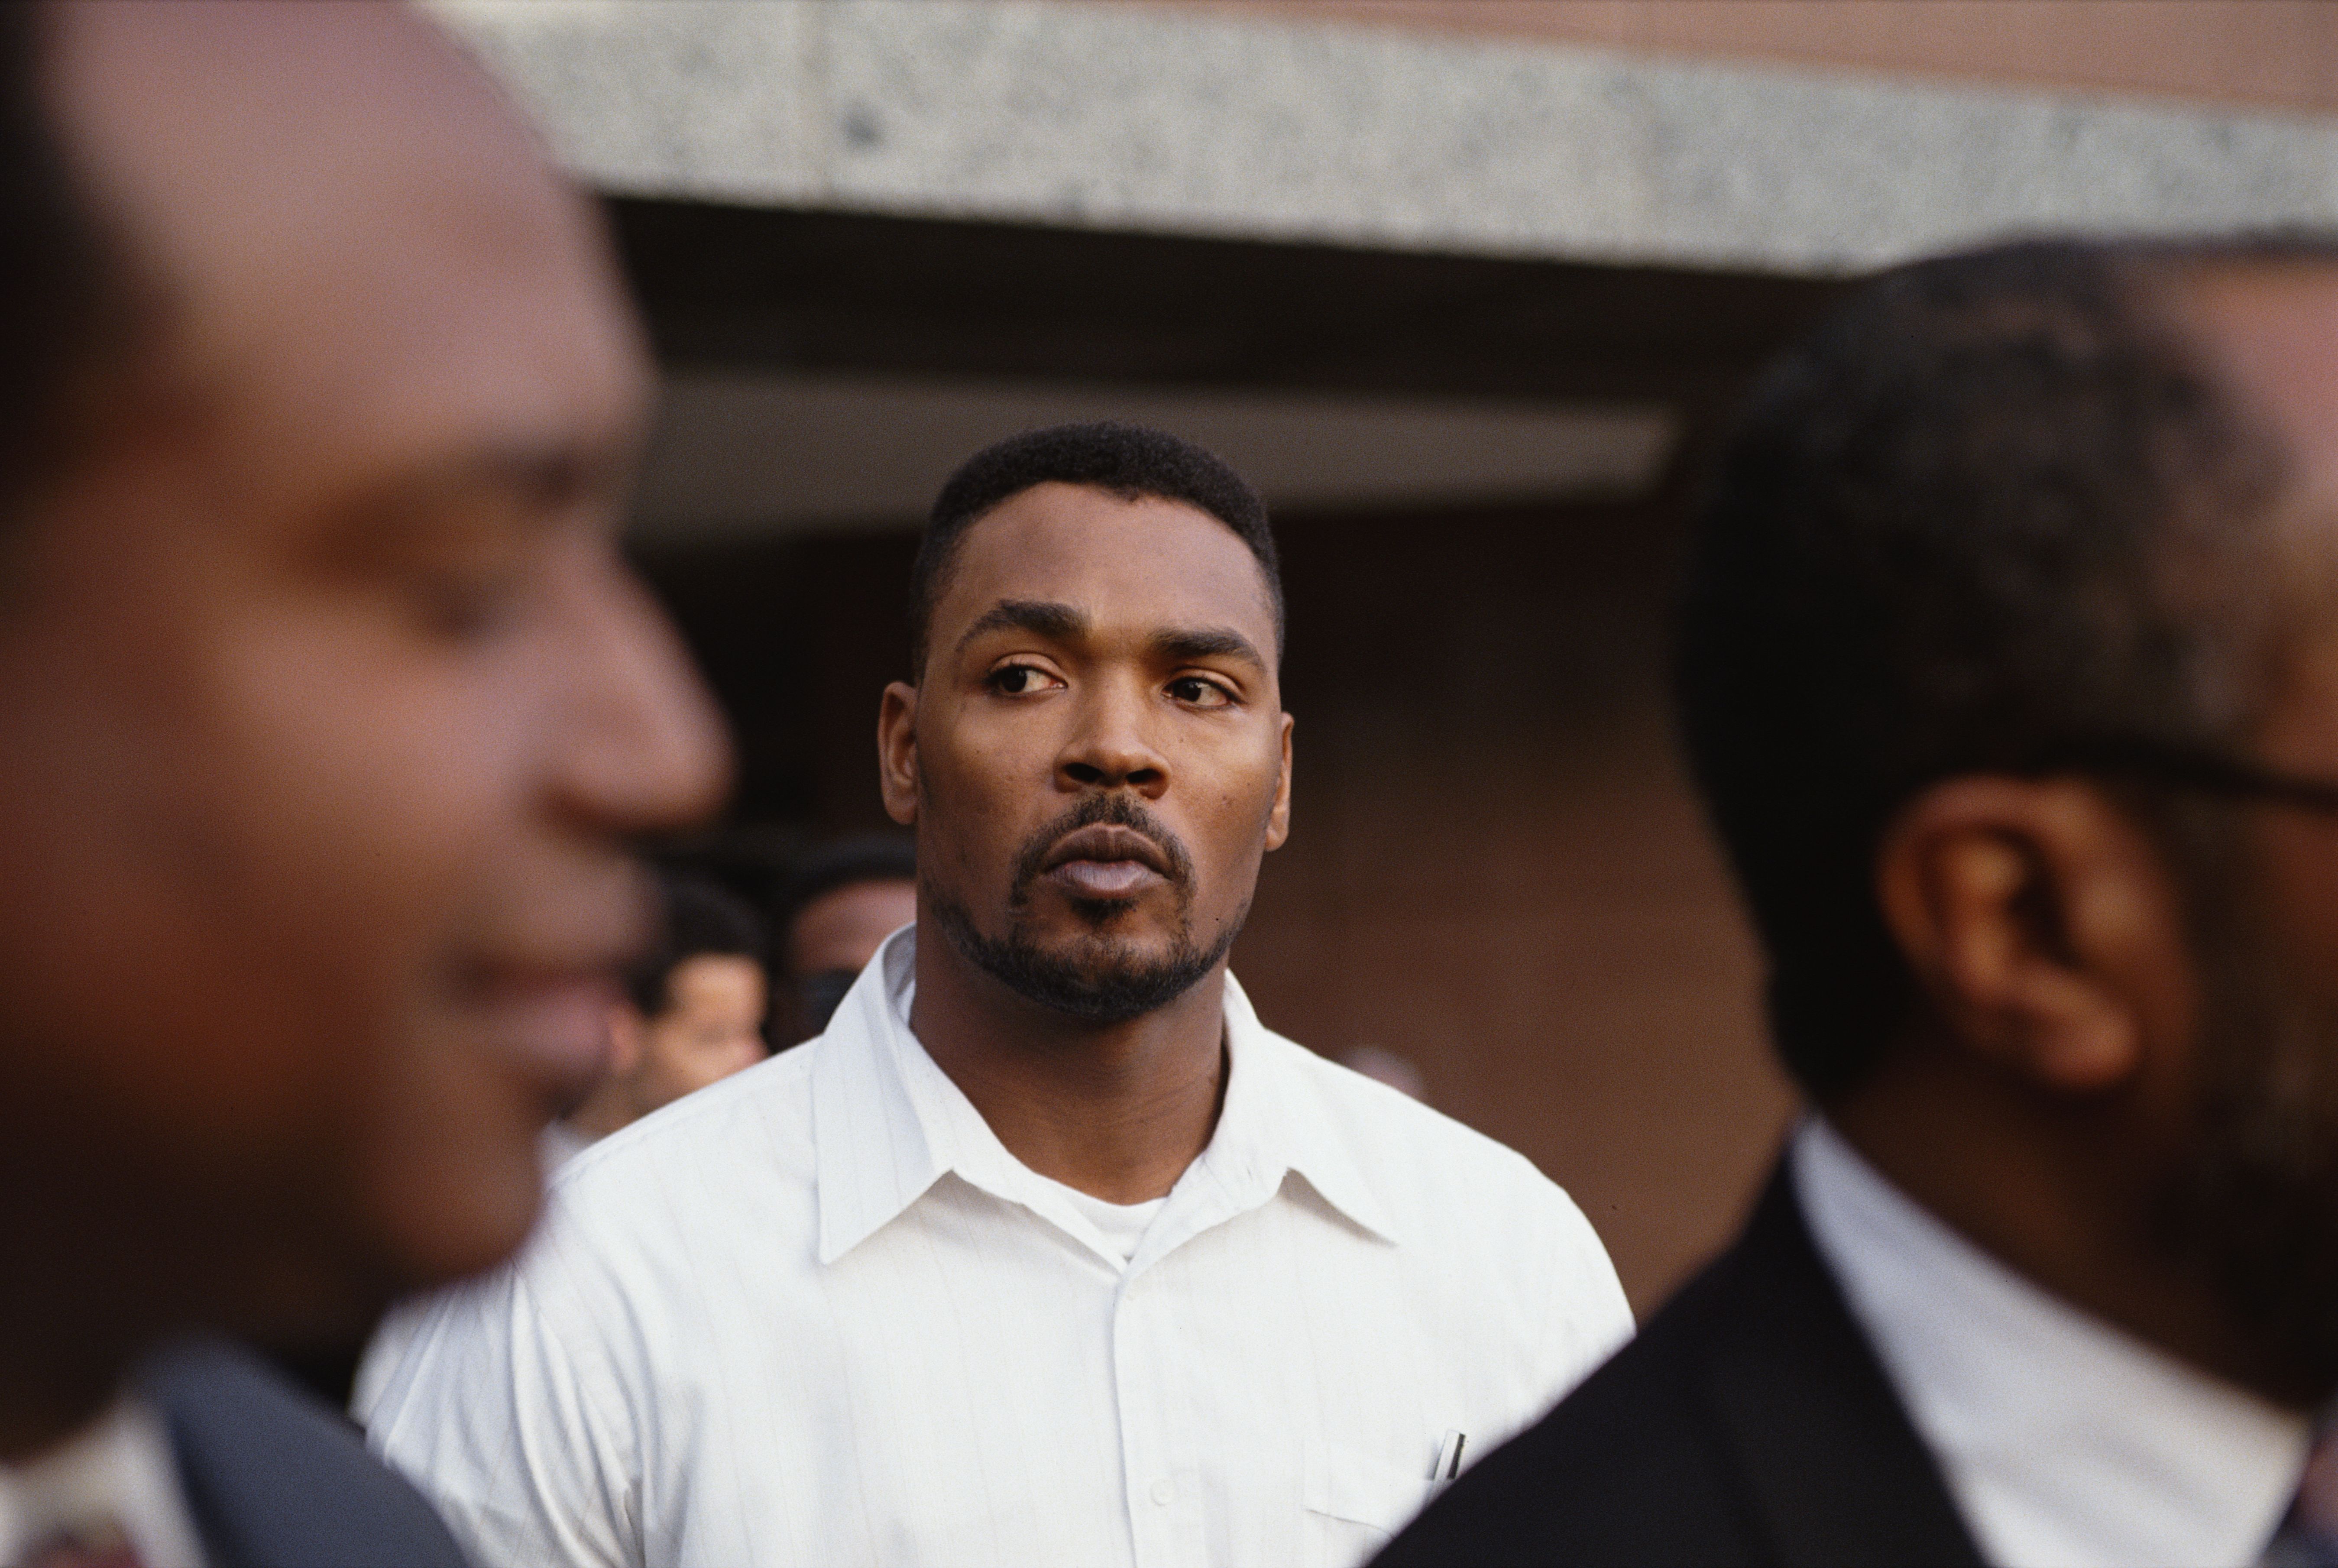 Rodney King after the acquittal of the four LAPD officers who striked him with their batons on March 3, 1991.